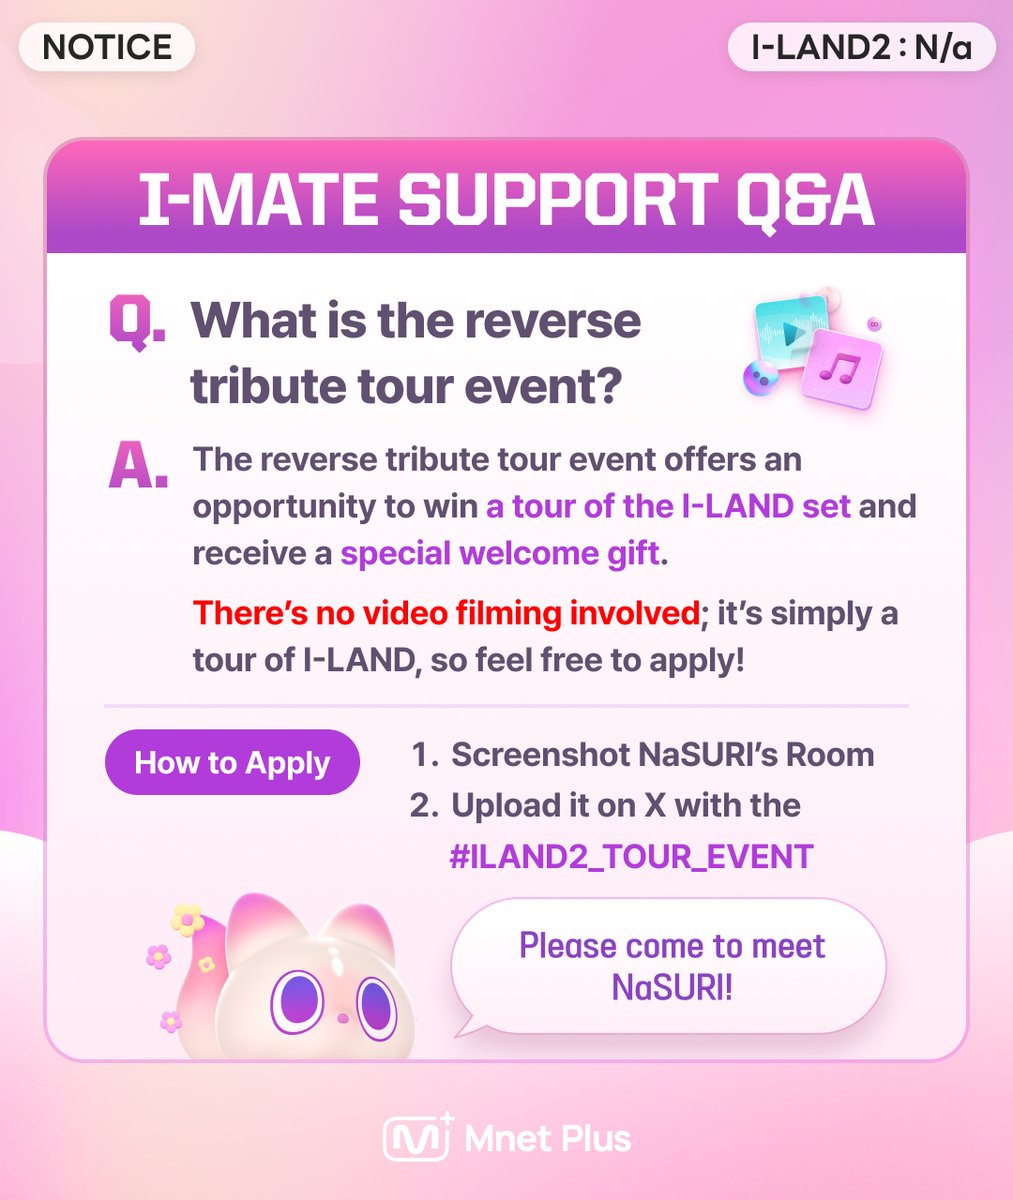 [I-LAND2 : N/a] I-MATE SUPPORT from NaSURI💜 Hello I-MATE! ╰(*°▽°*)╯ Are you all working hard on support? ✪ ω ✪ NaSURI is here to explain things that I-MATEs are curious about! Please continue to support us(´▽`ʃ♡ƪ) 👉mnetplus.onelink.me/TRa8/Support #ILAND2 #아이랜드2